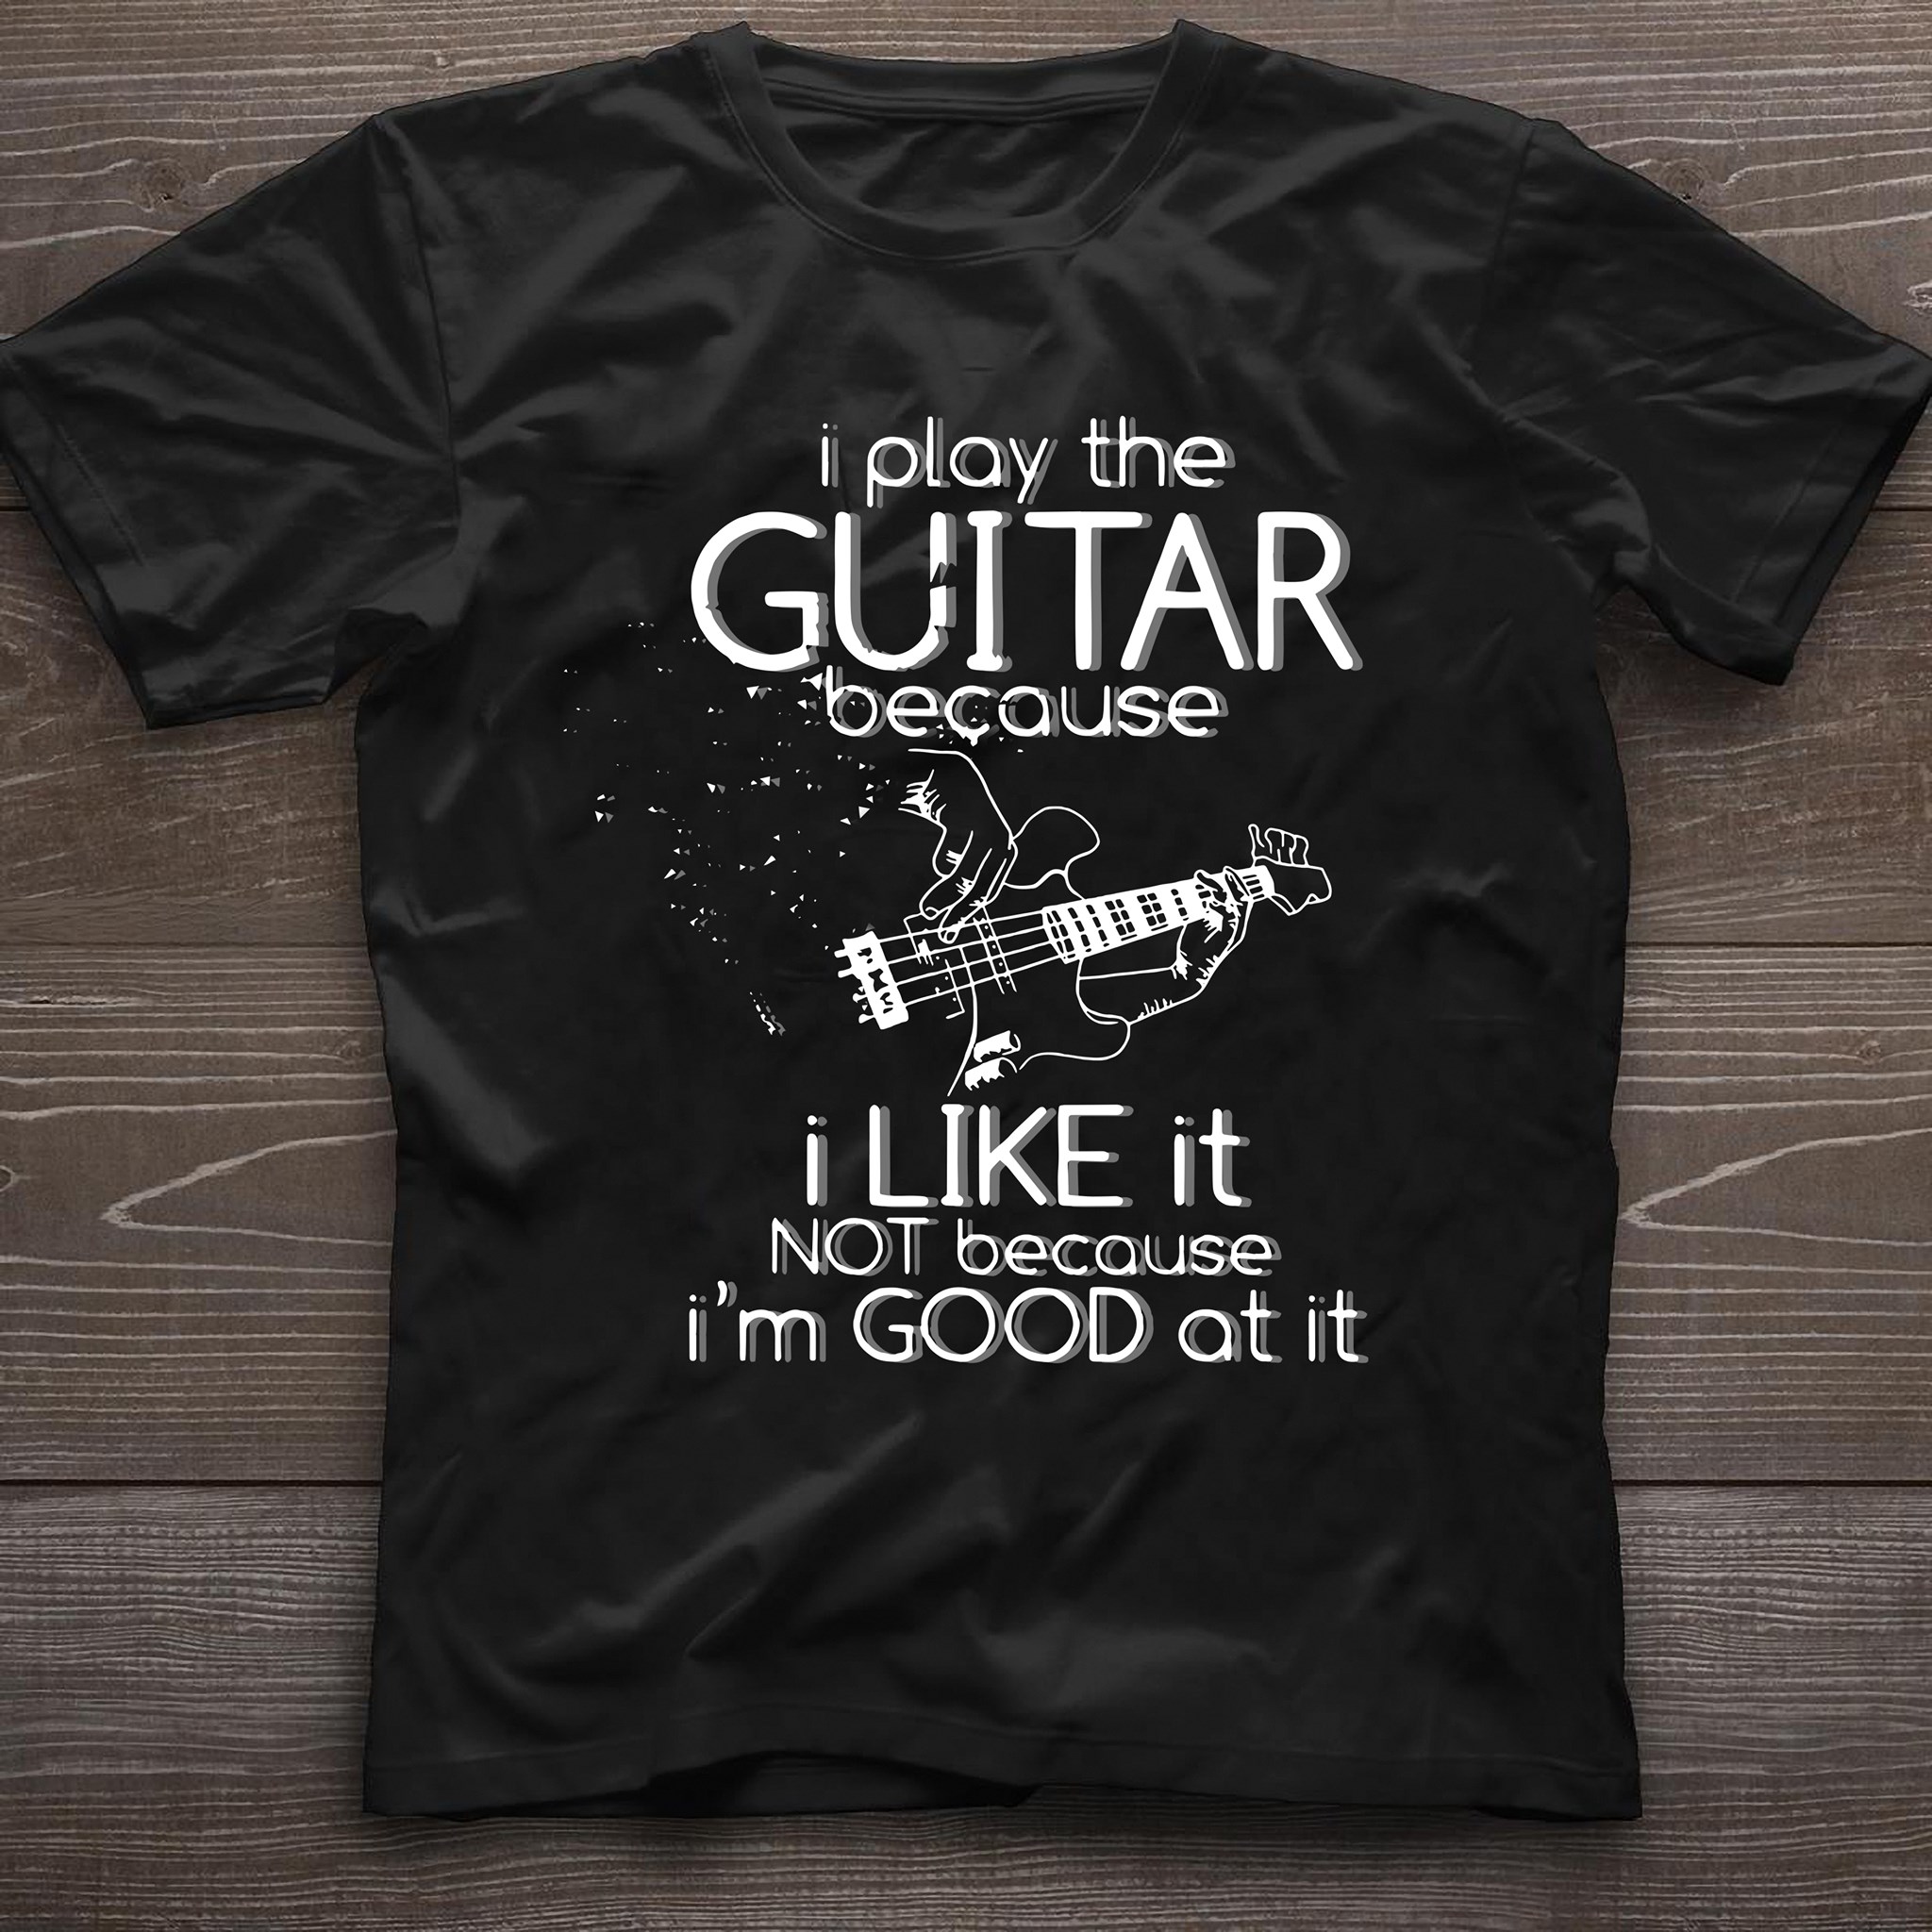 Guitar Lover - I Play The Guitar Because I Like It Not Because I'm Good At It